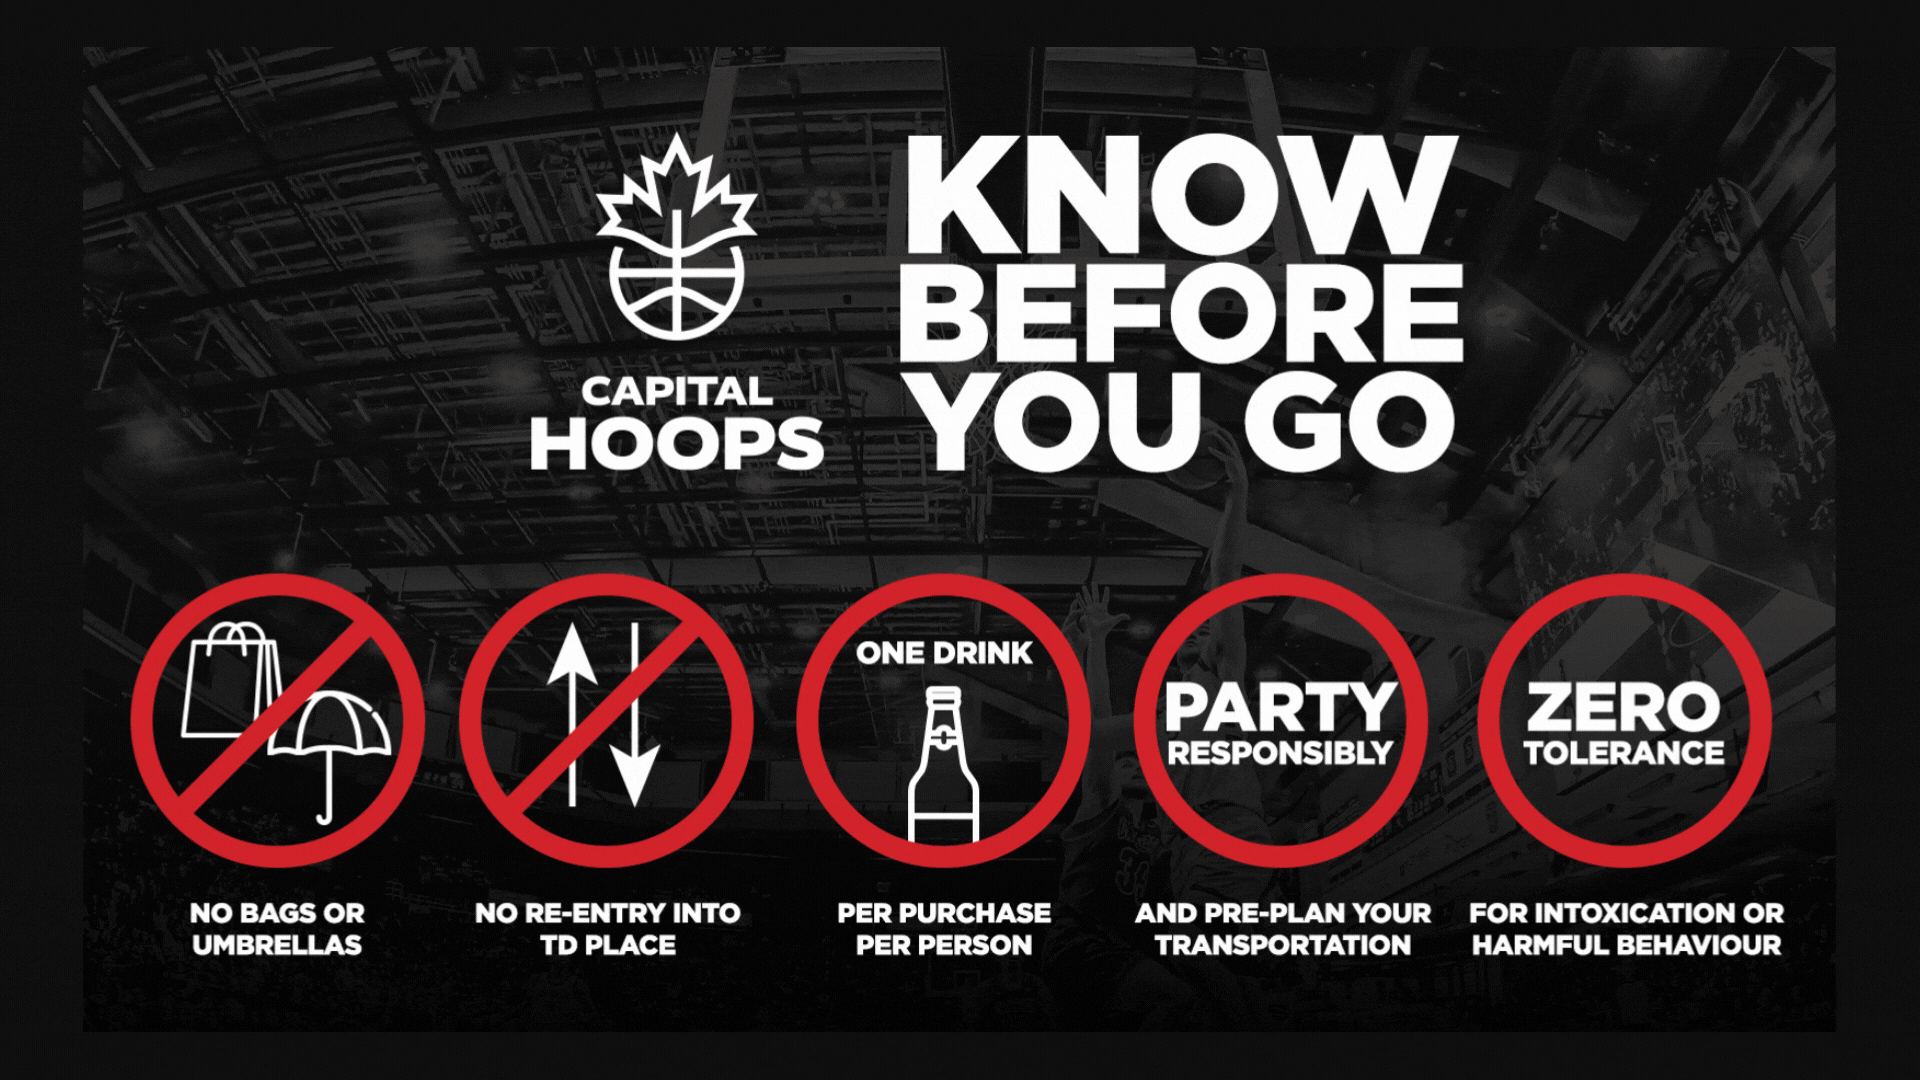 capital hoops know before you go instructions